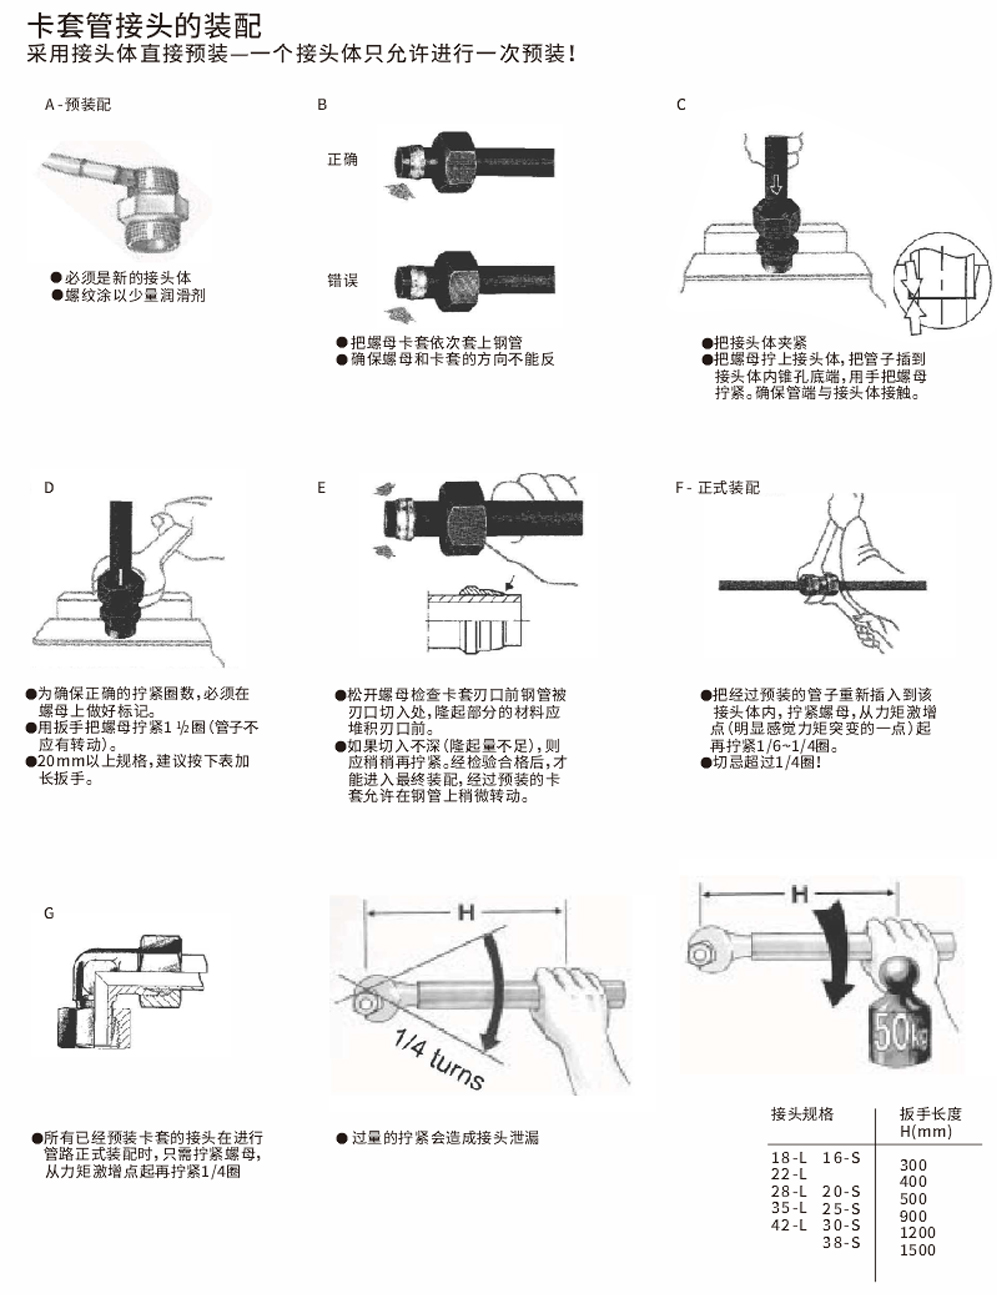 Assembly of clamp casing joint